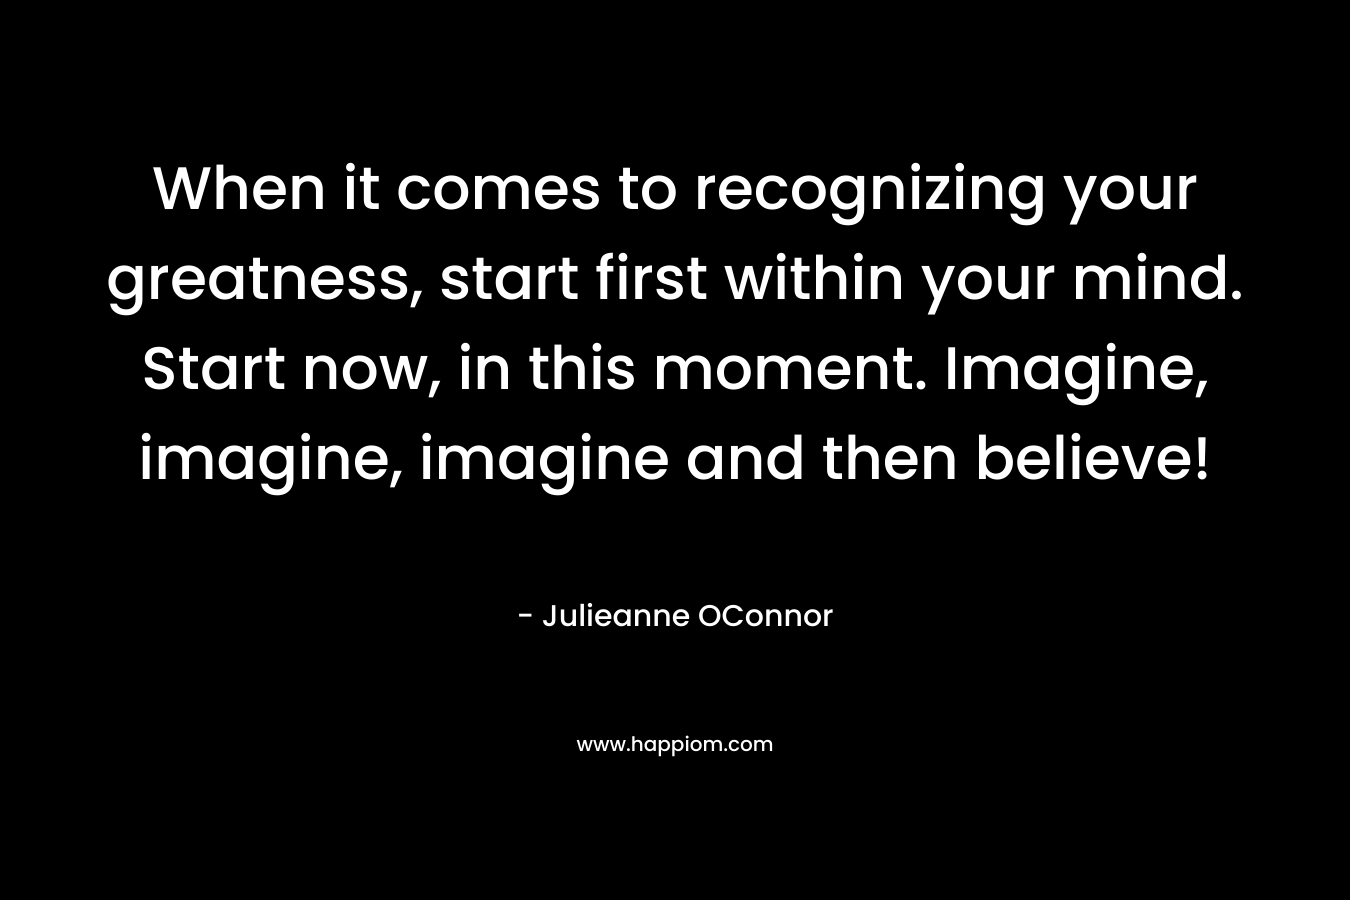 When it comes to recognizing your greatness, start first within your mind. Start now, in this moment. Imagine, imagine, imagine and then believe!